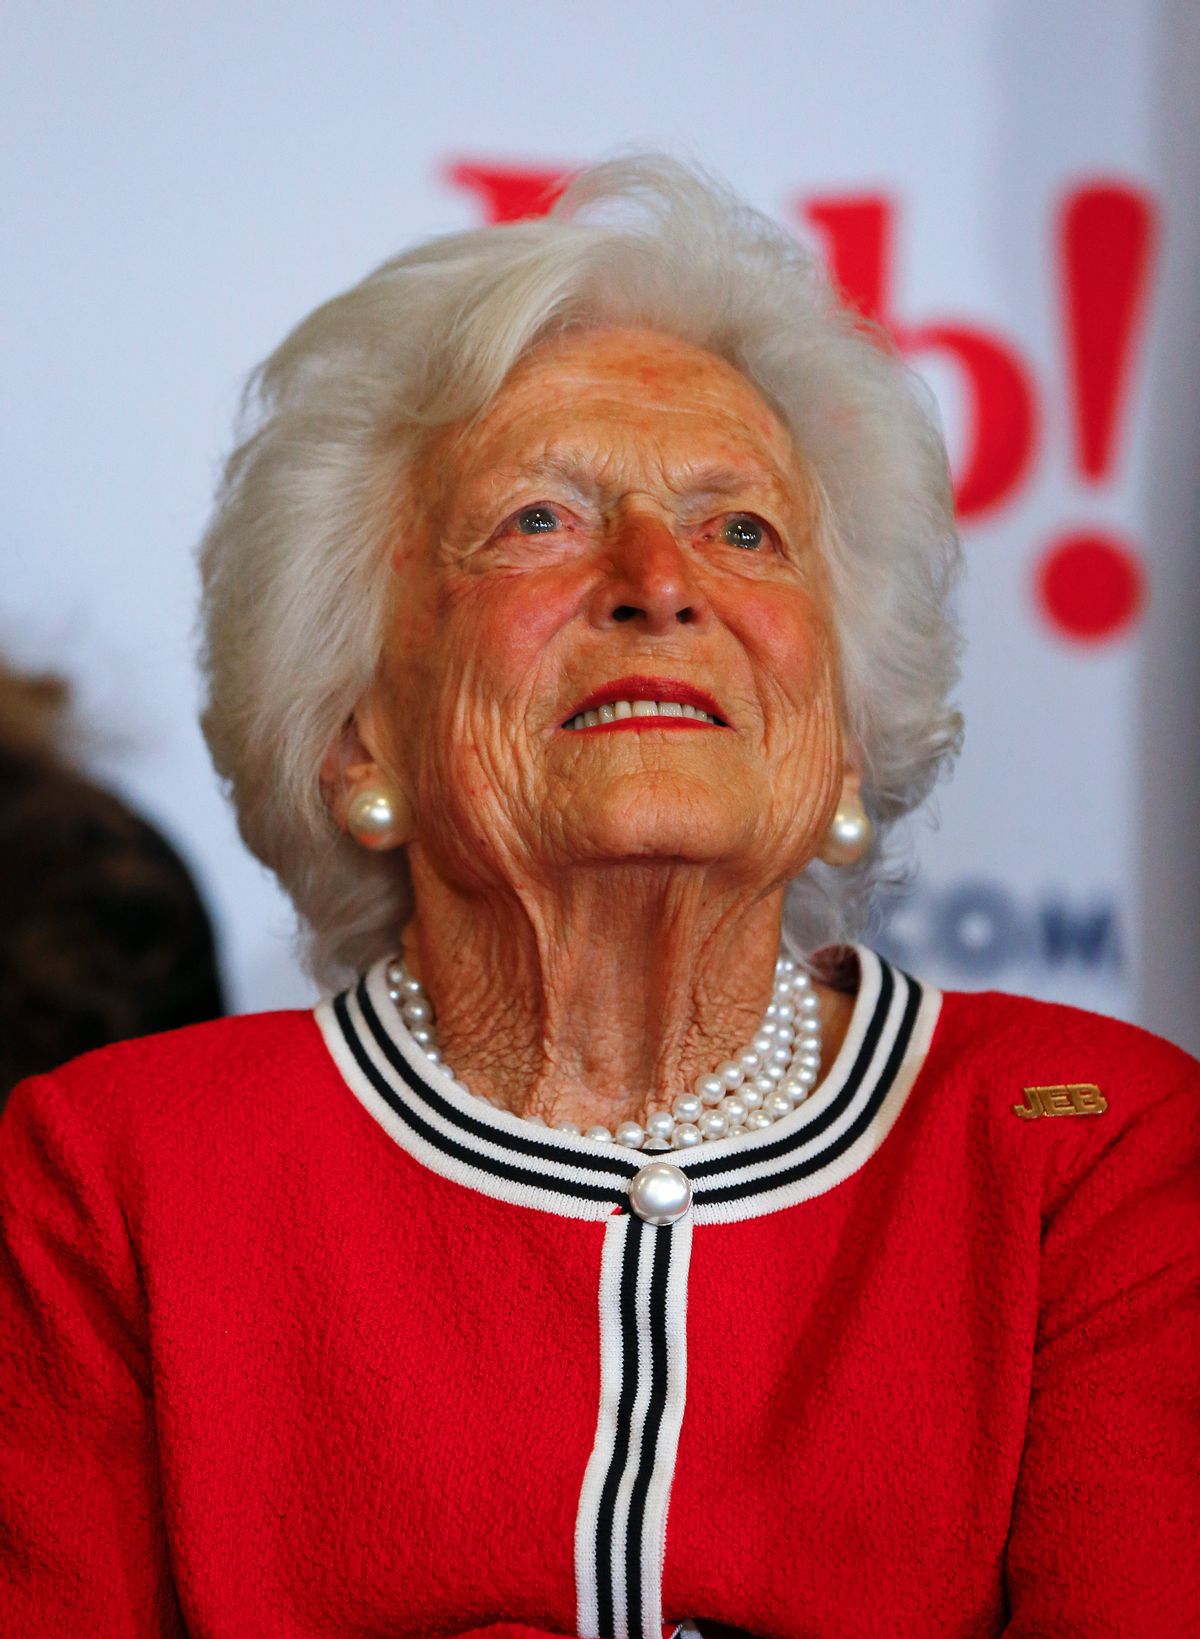 Former first lady Barbara Bush listens to her son, Republican presidential candidate, former Florida Gov. Jeb Bush speak during a campaign stop at Wade's Restaurant, Friday, Feb. 19, 2016 in Spartanburg, S.C. (AP Photo/Paul Sancya) (AP)